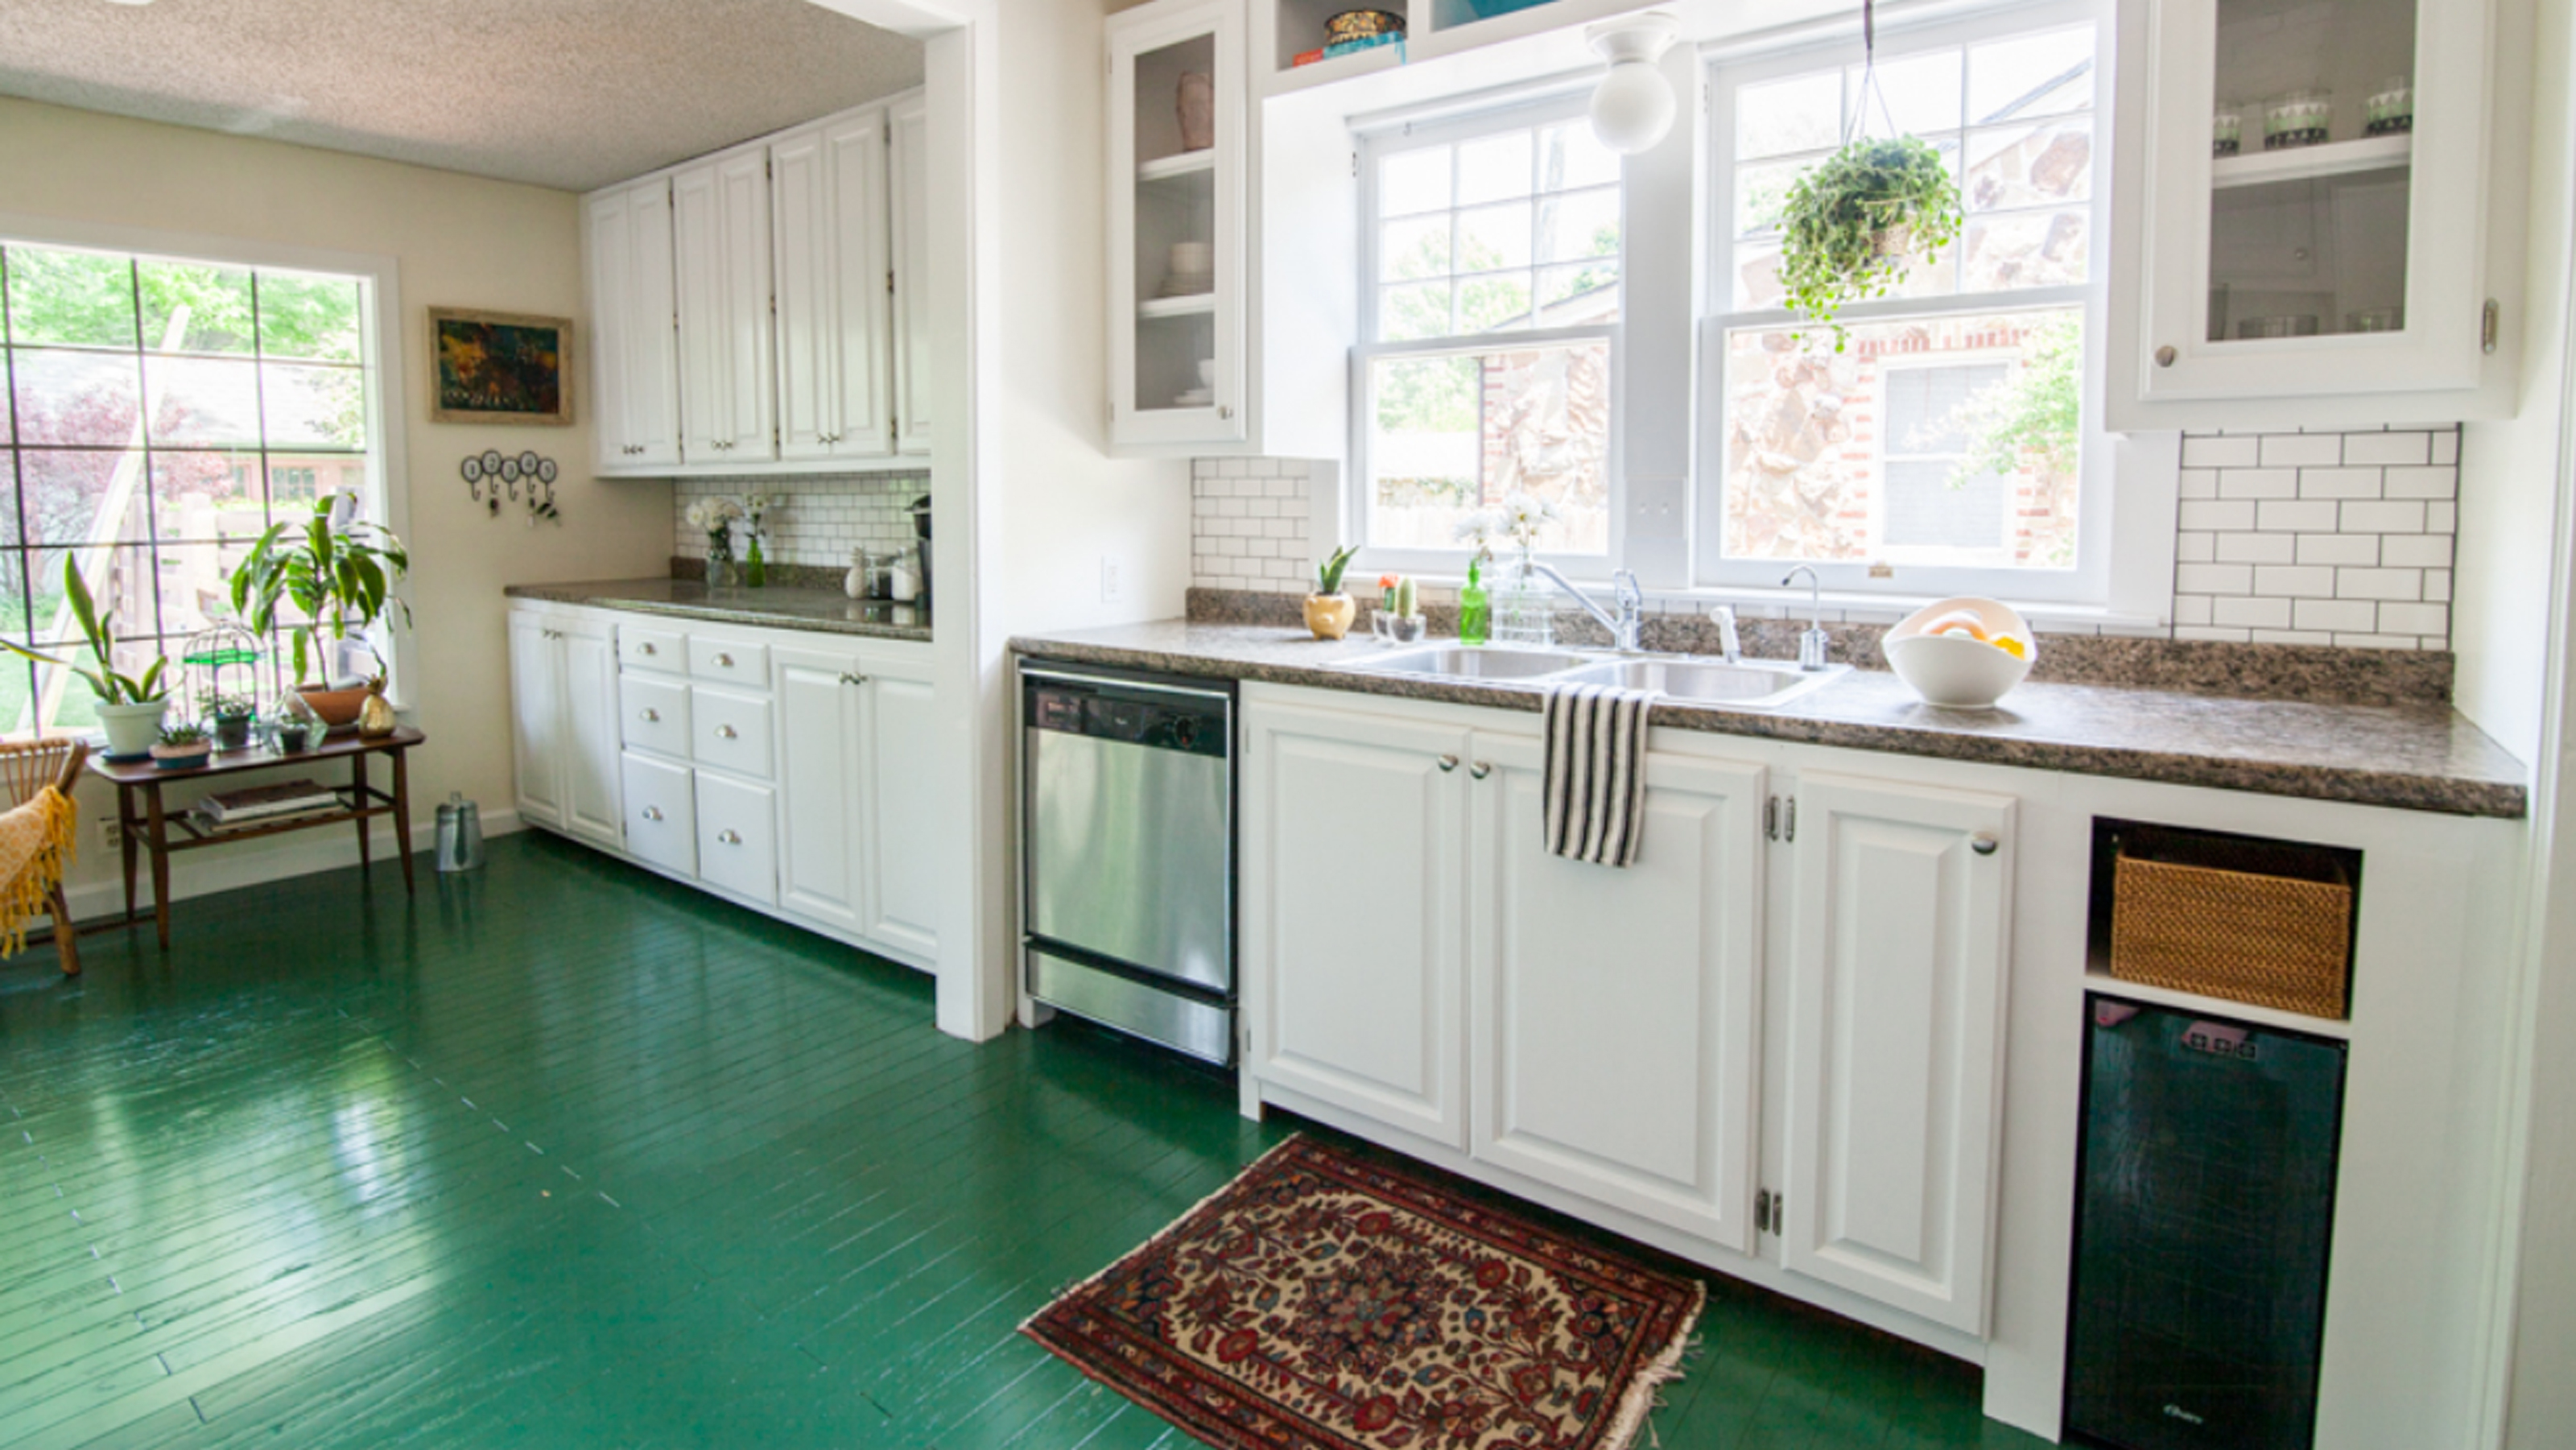 9 inexpensive kitchen flooring options you can diy | real homes